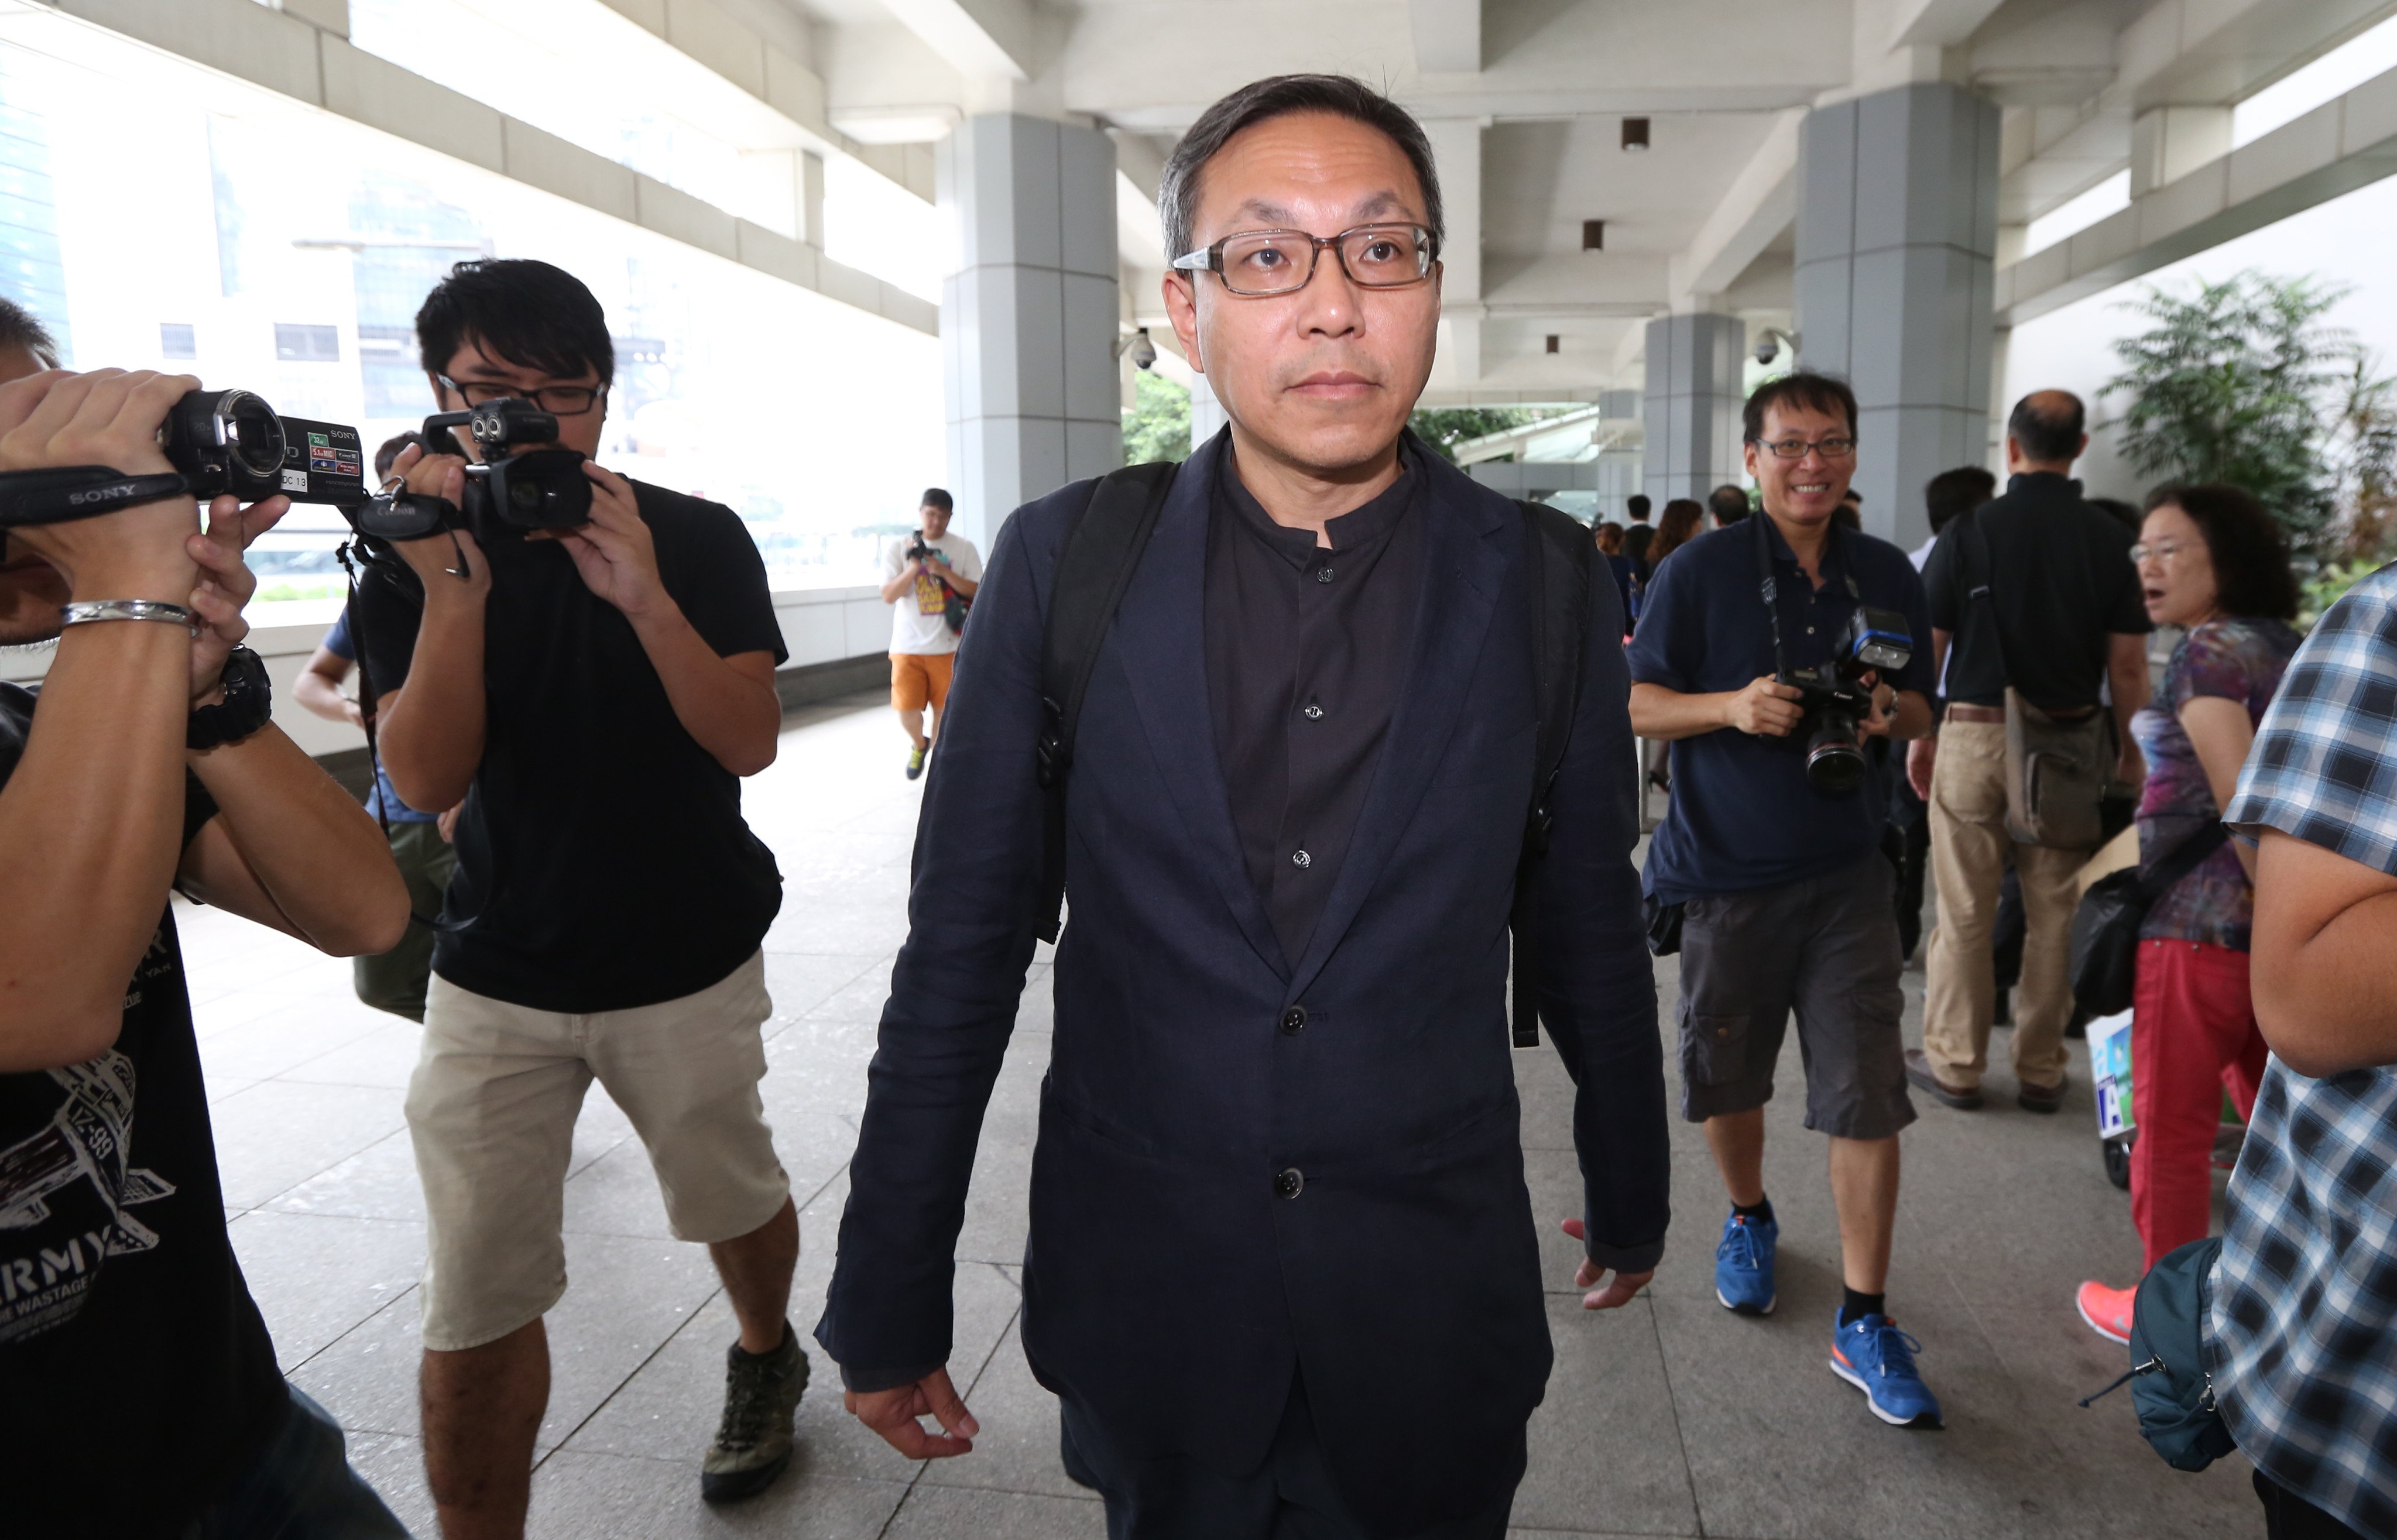 Cheung Kim-hung, the ex-publisher of Apple Daily, arrives at court to give evidence for the prosecution in the trial of Jimmy Lai on conspiracy charges. Photo: Nora Tam